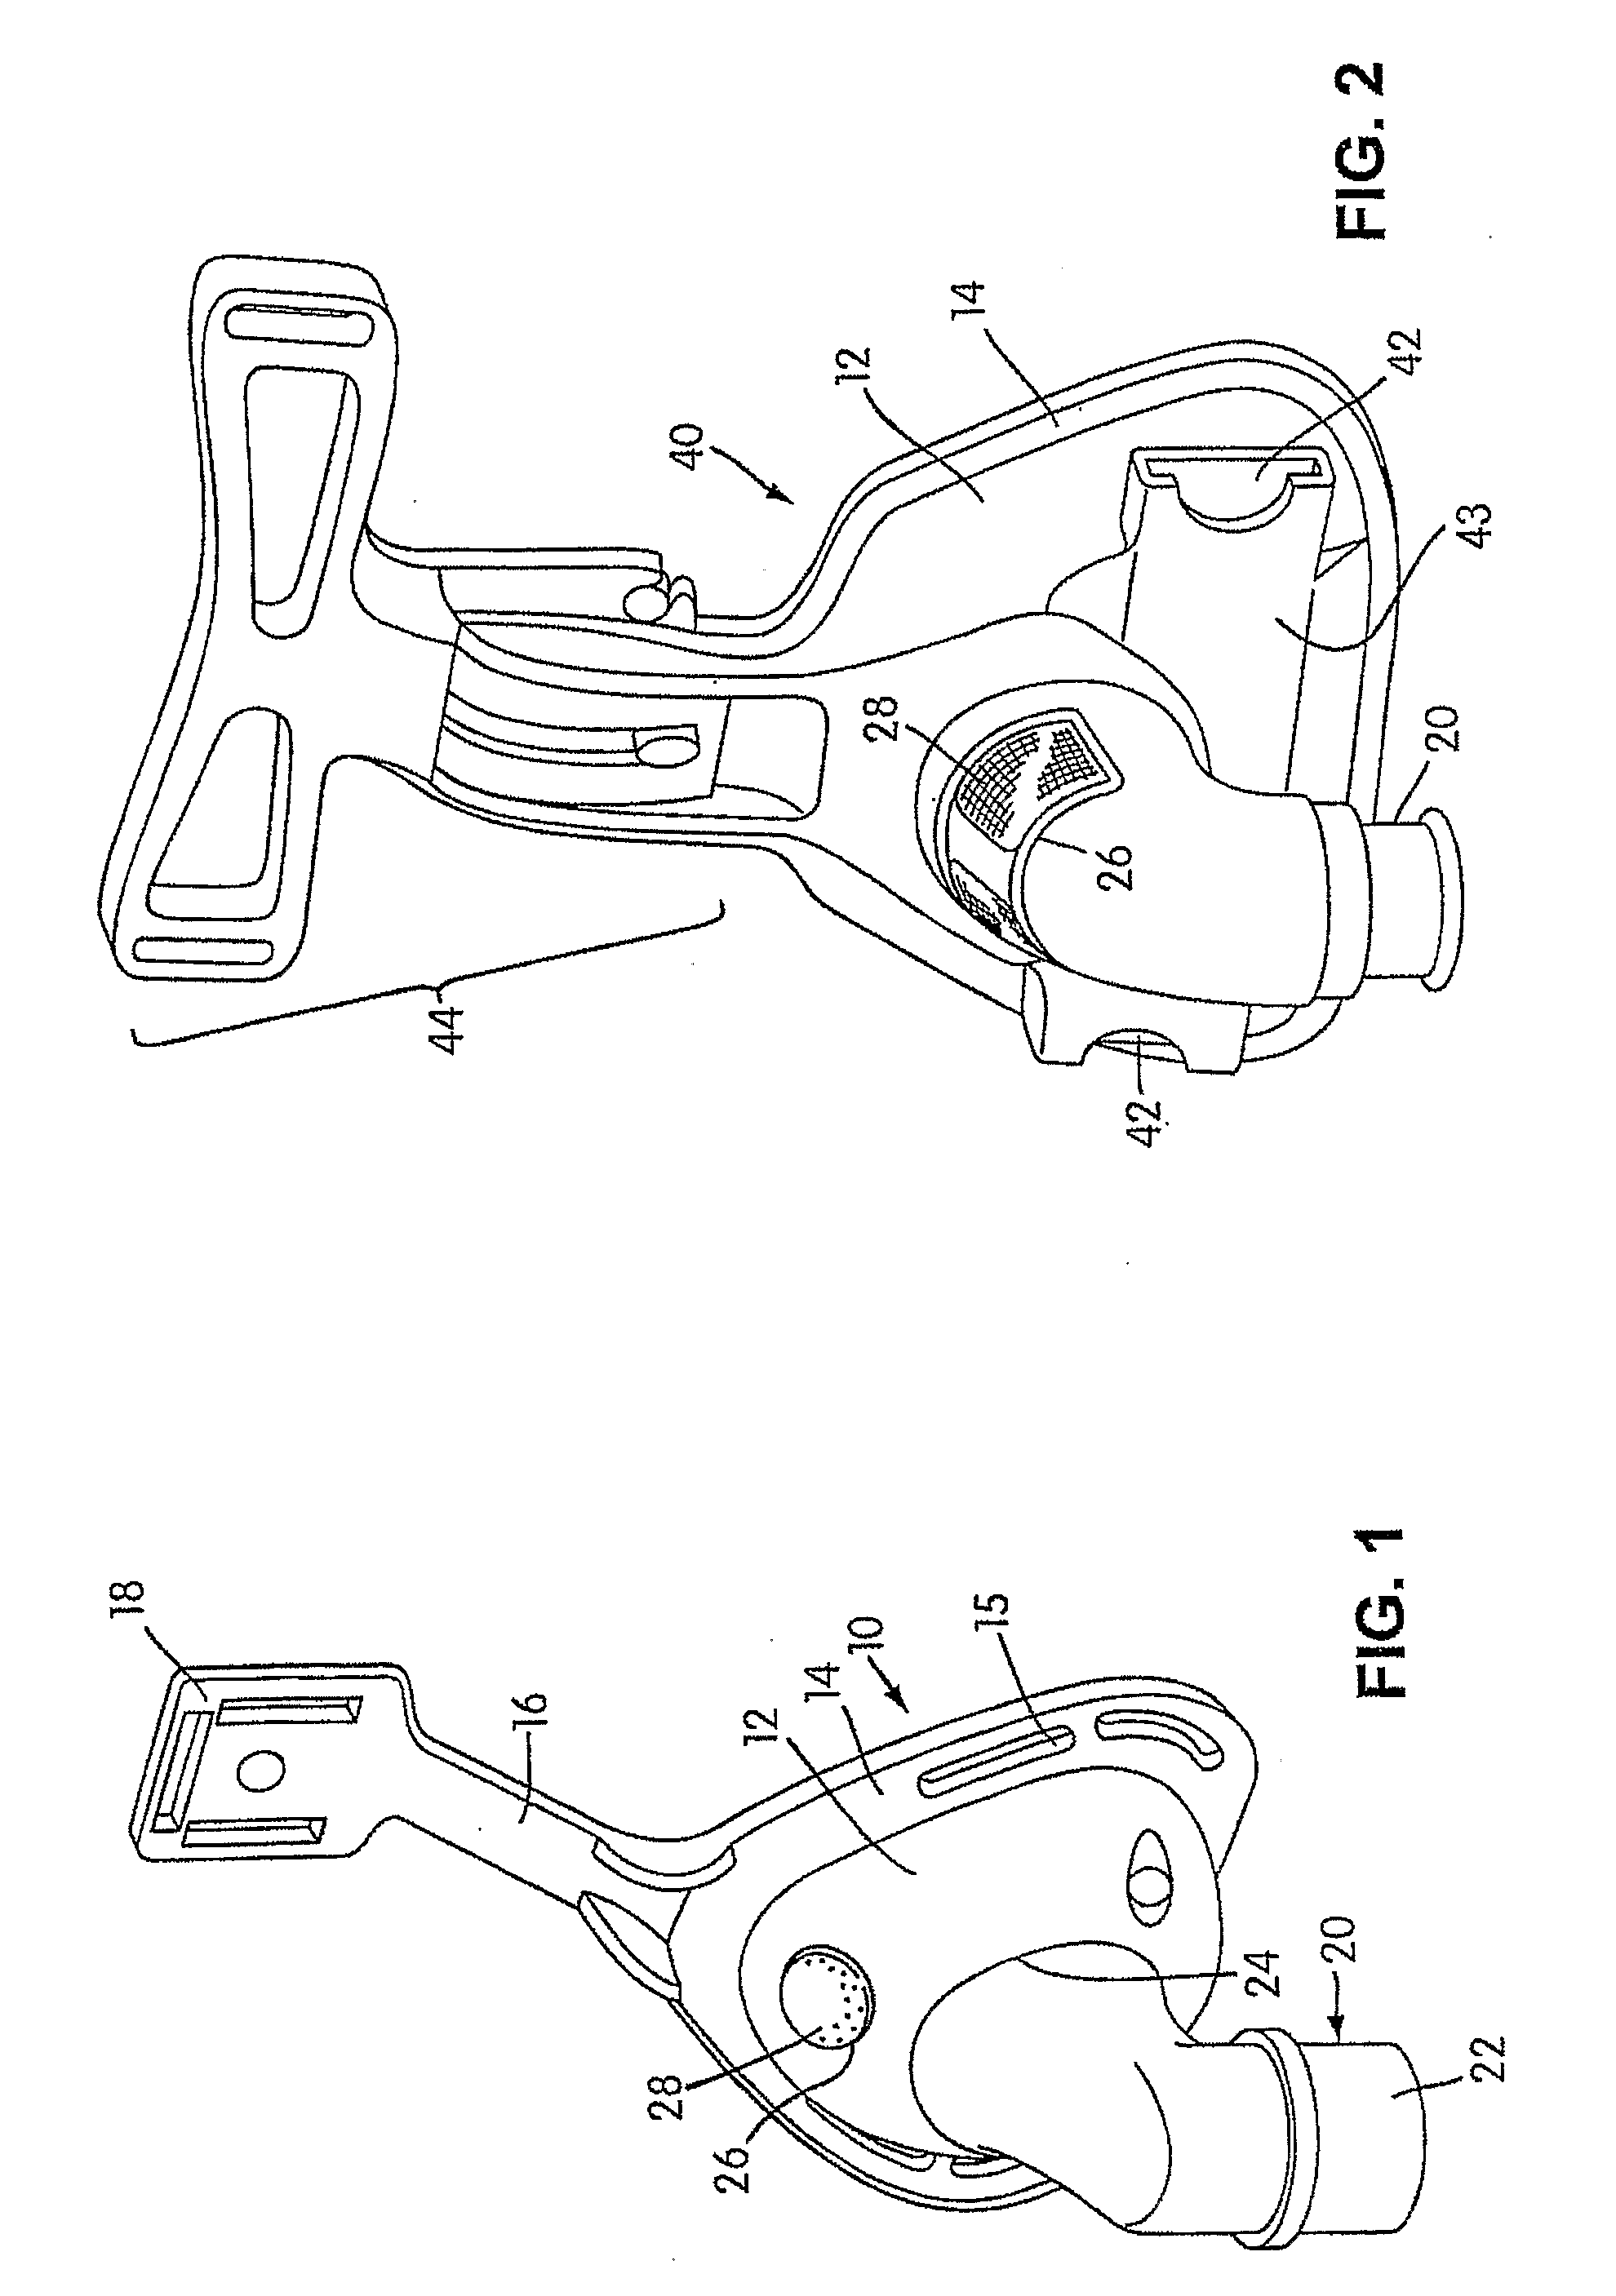 Method and Apparatus for Managing Moisture Buildup In Pressurised Breathing Systems